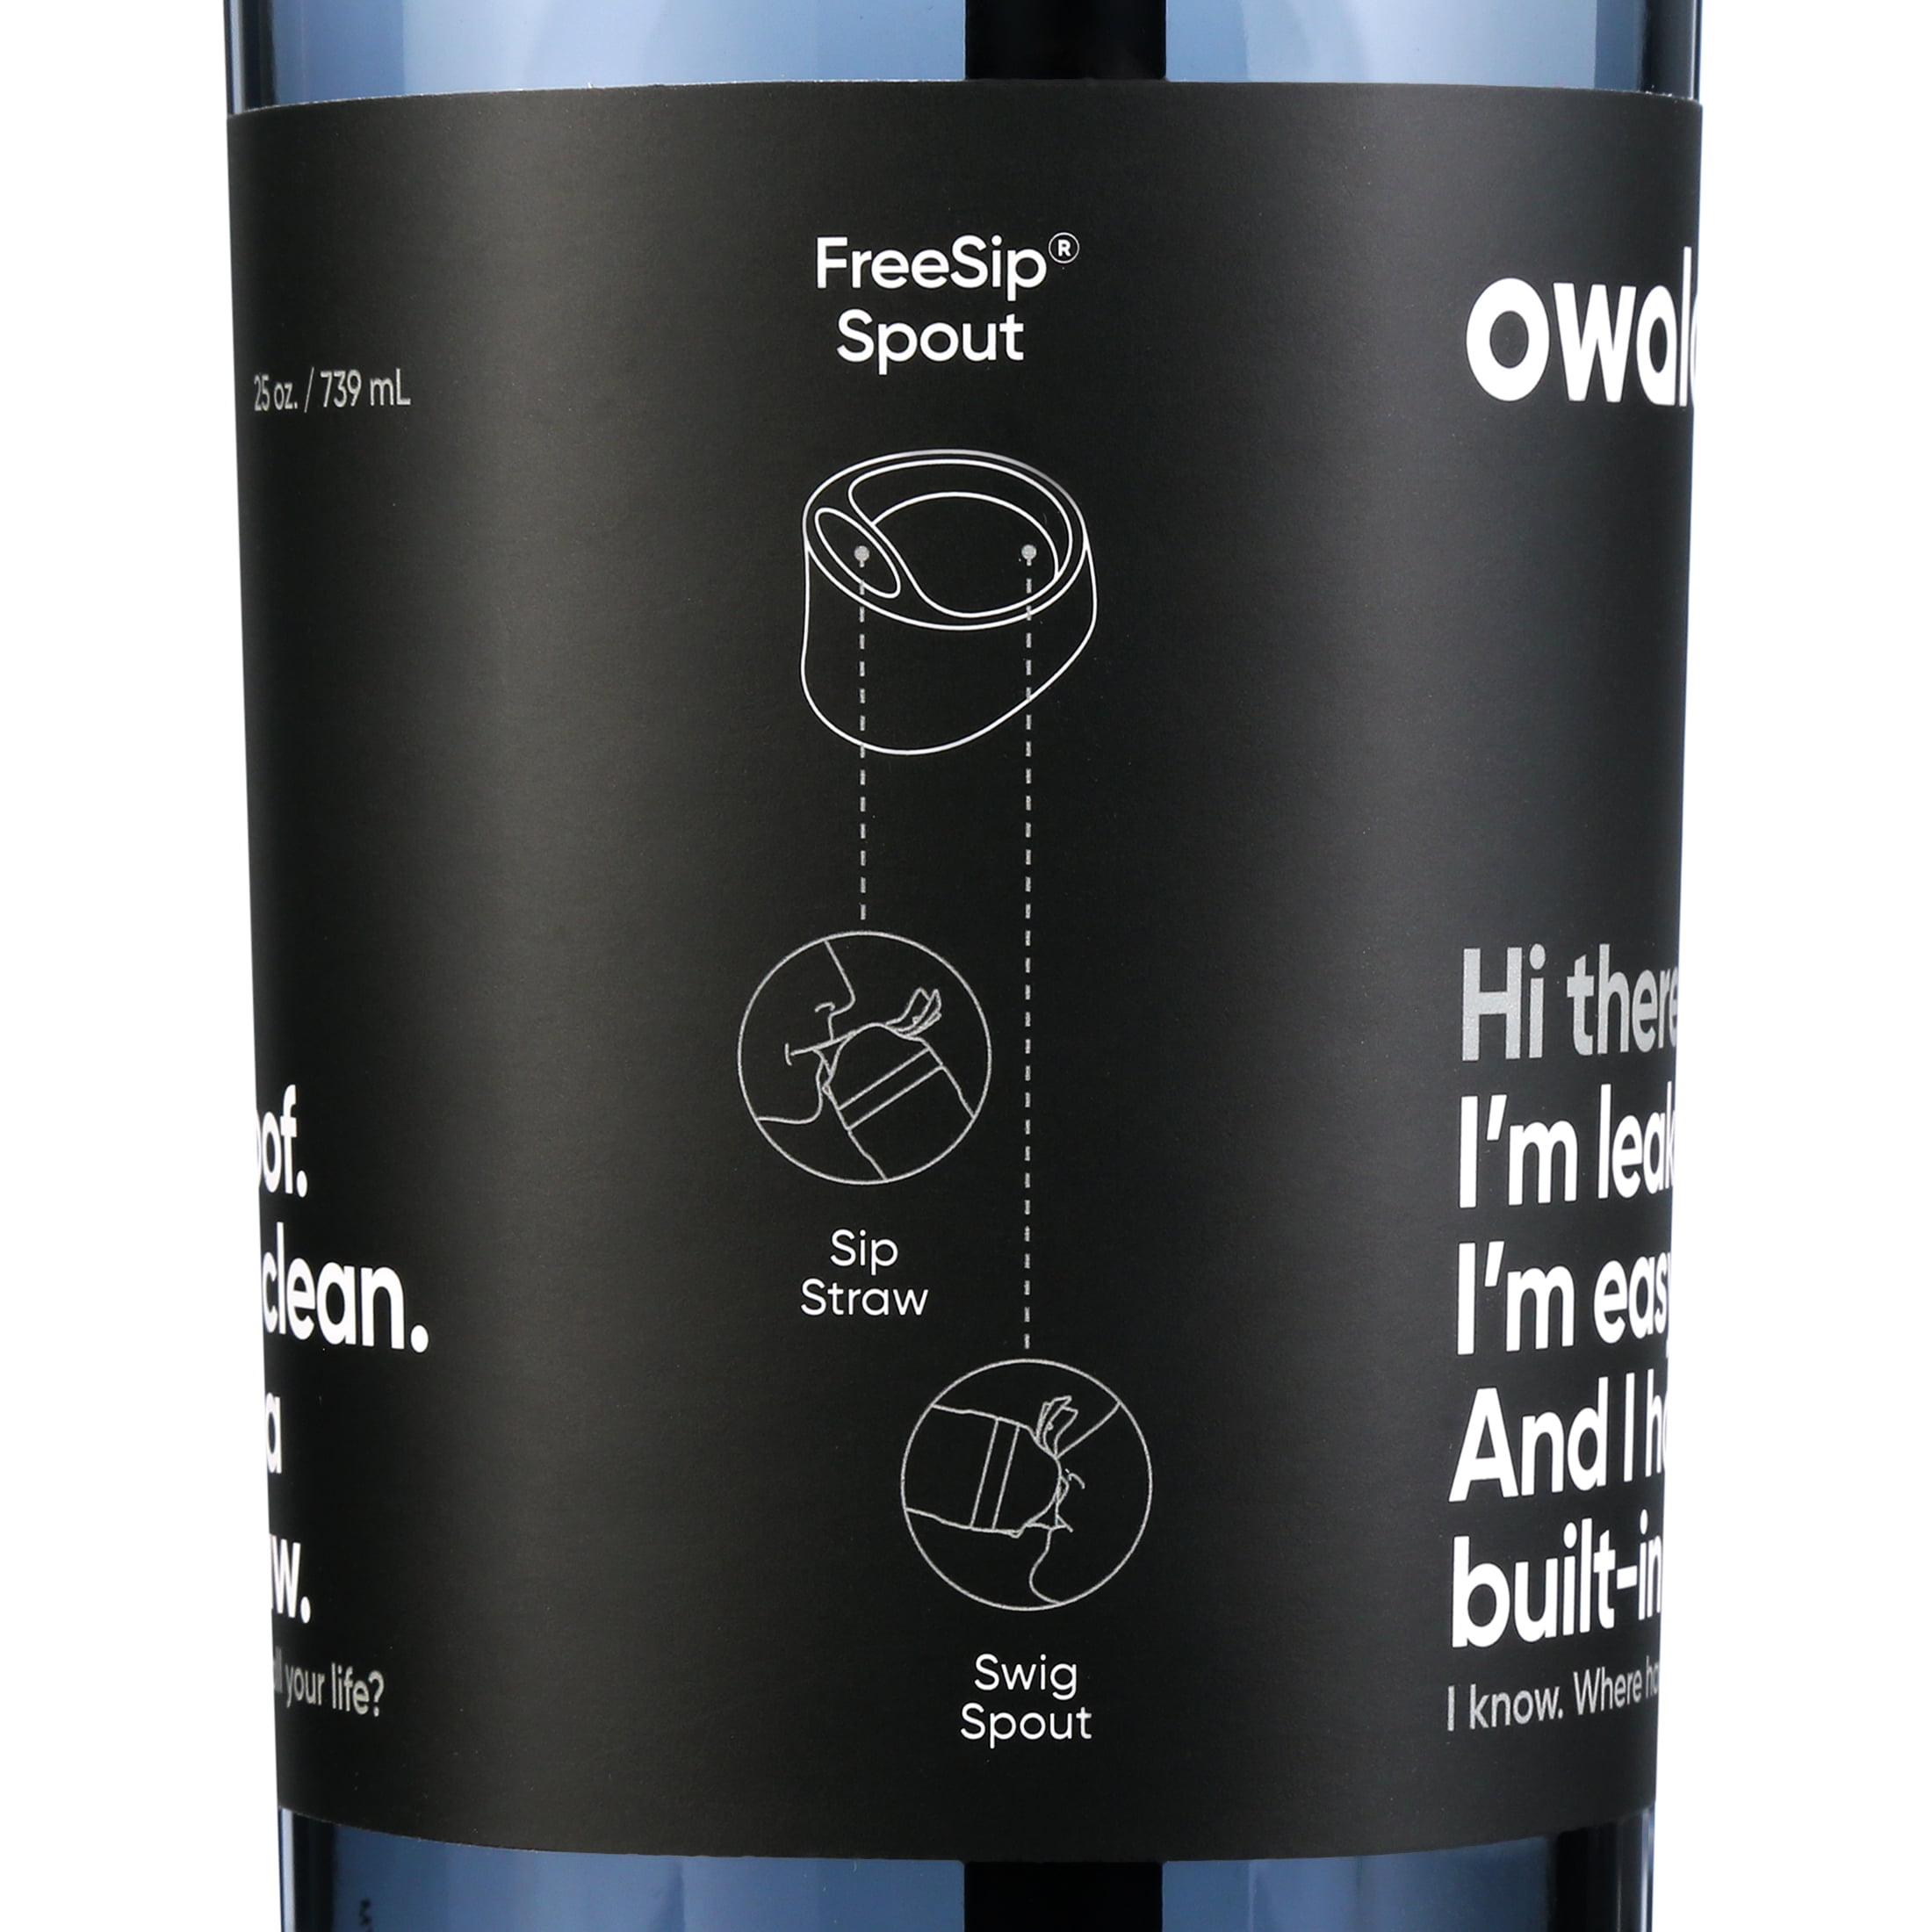 OWALA LIMITED EDITION water bottle 32oz color “Can You See Me” NWT